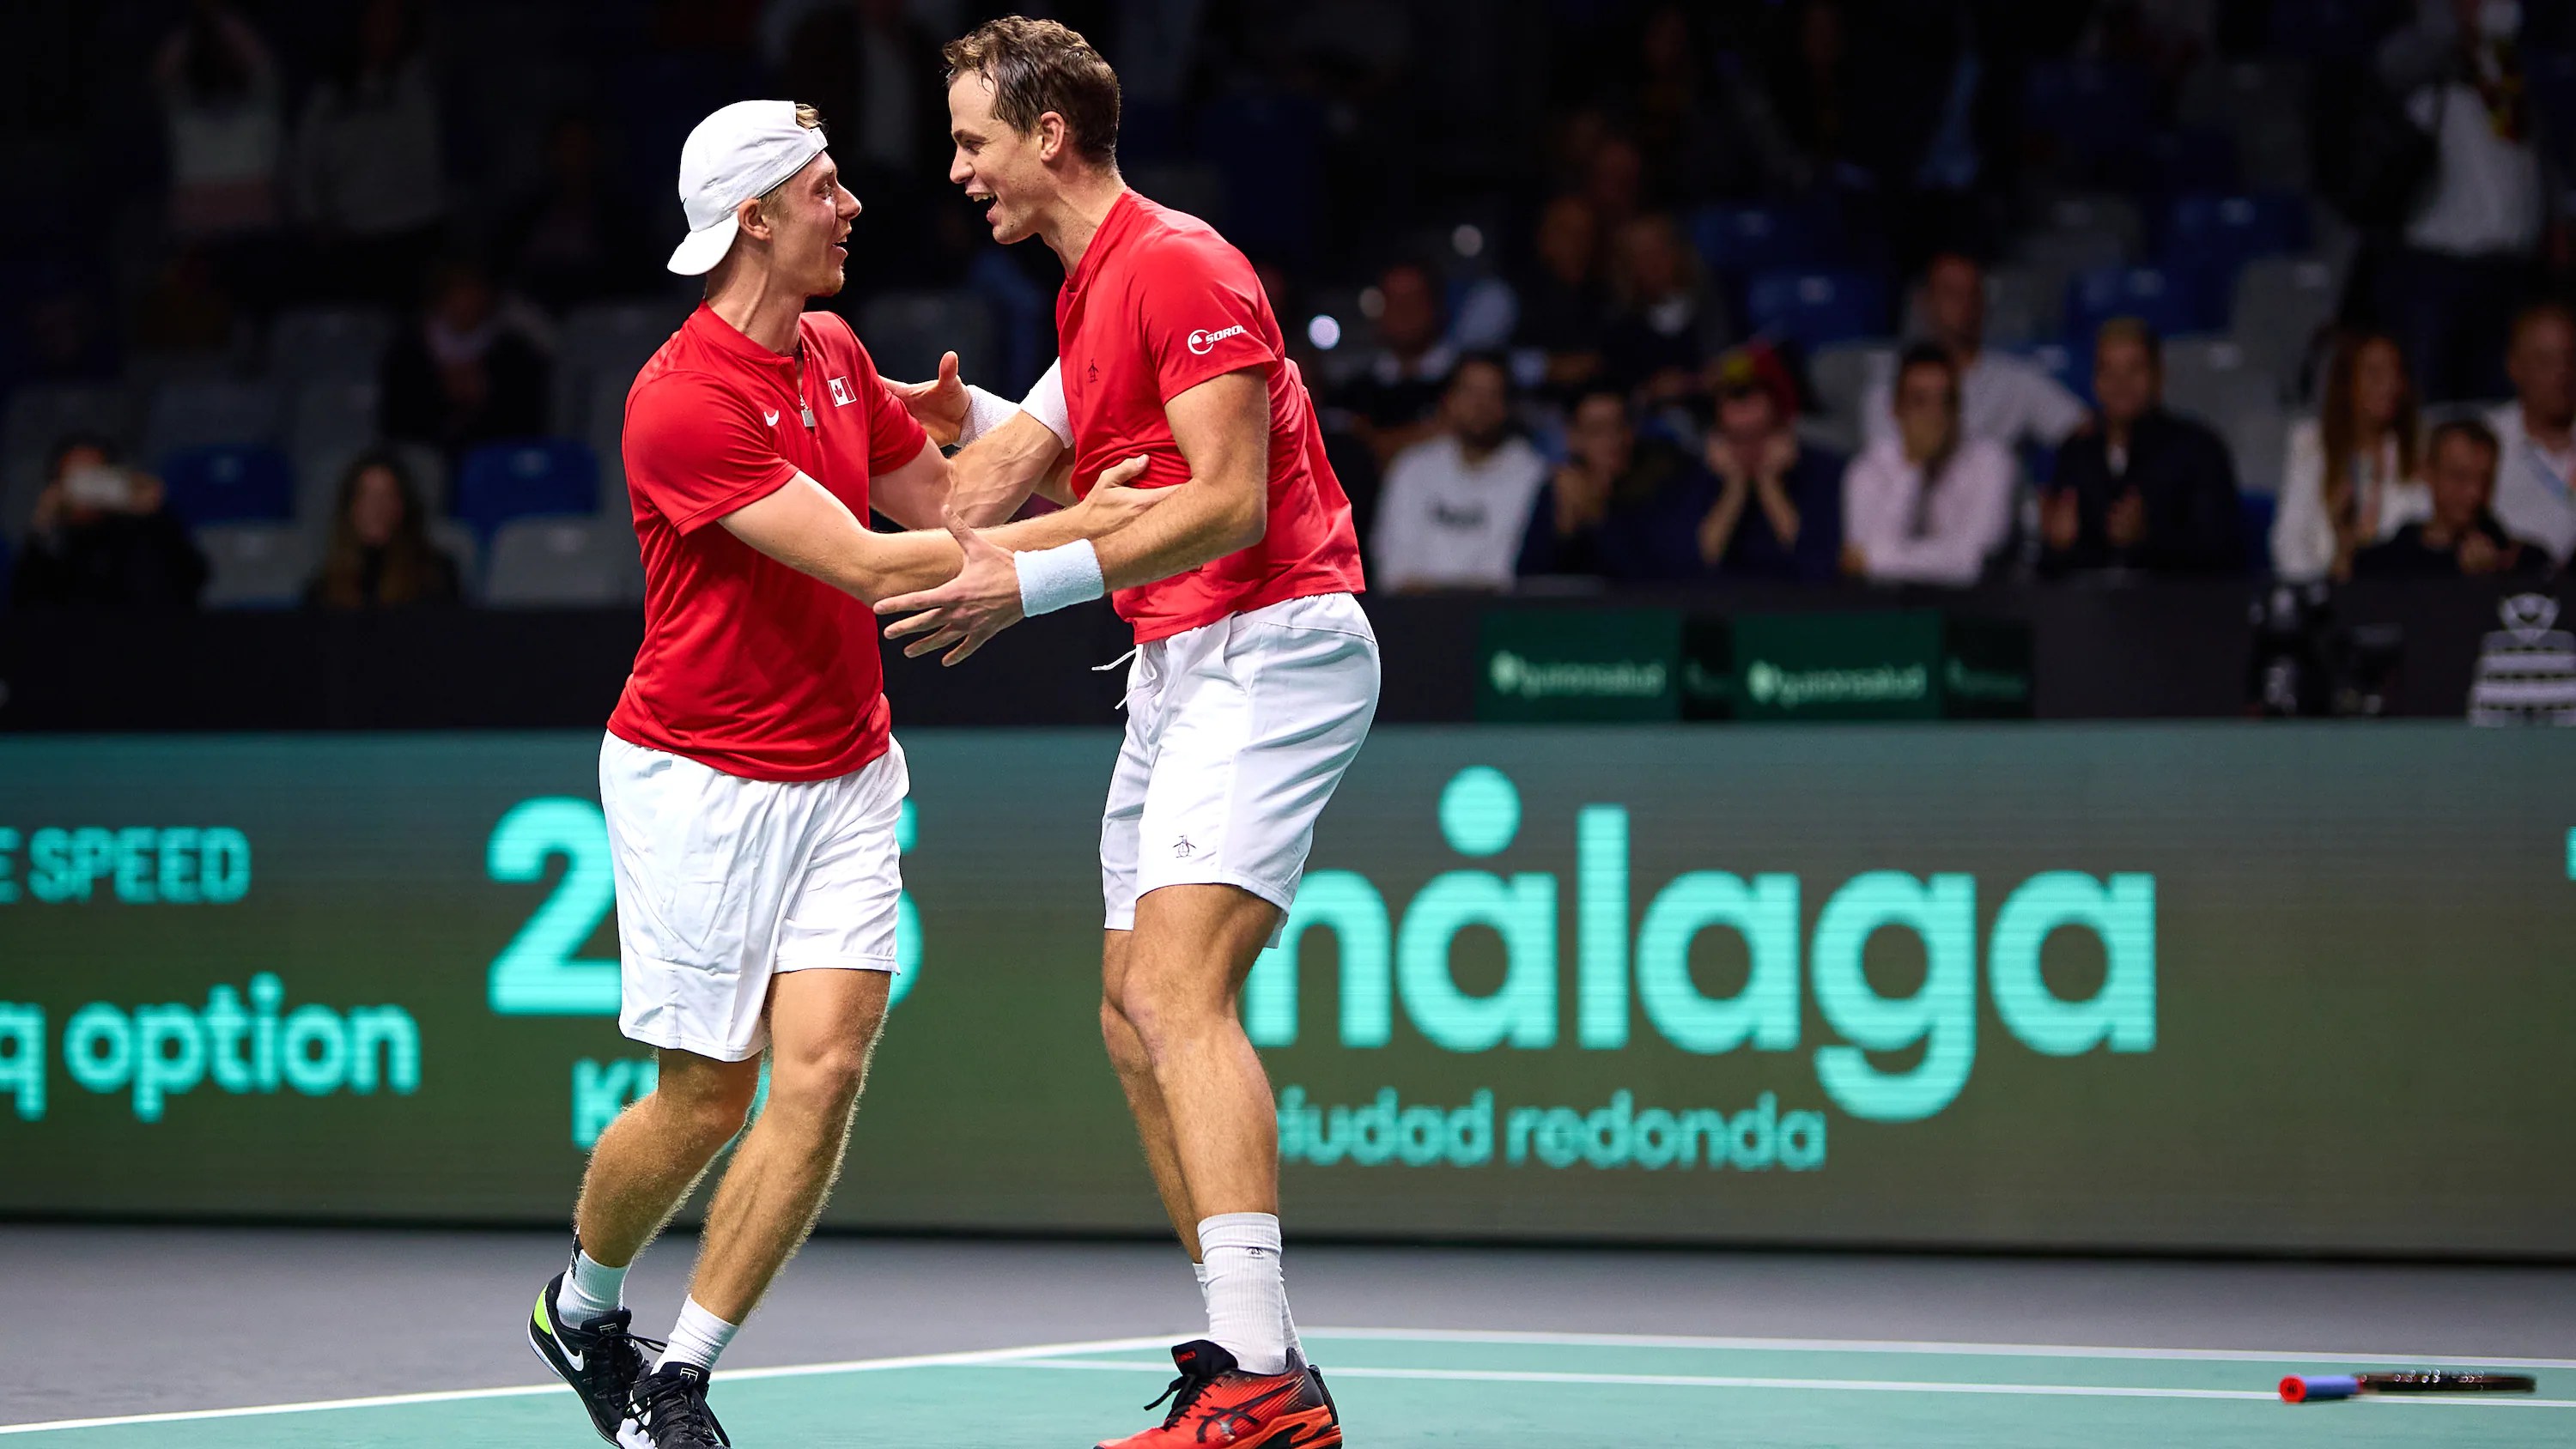 Davis Cup 2022 Results: Canada edge out Germany to set up Davis Cup semi with Italy 